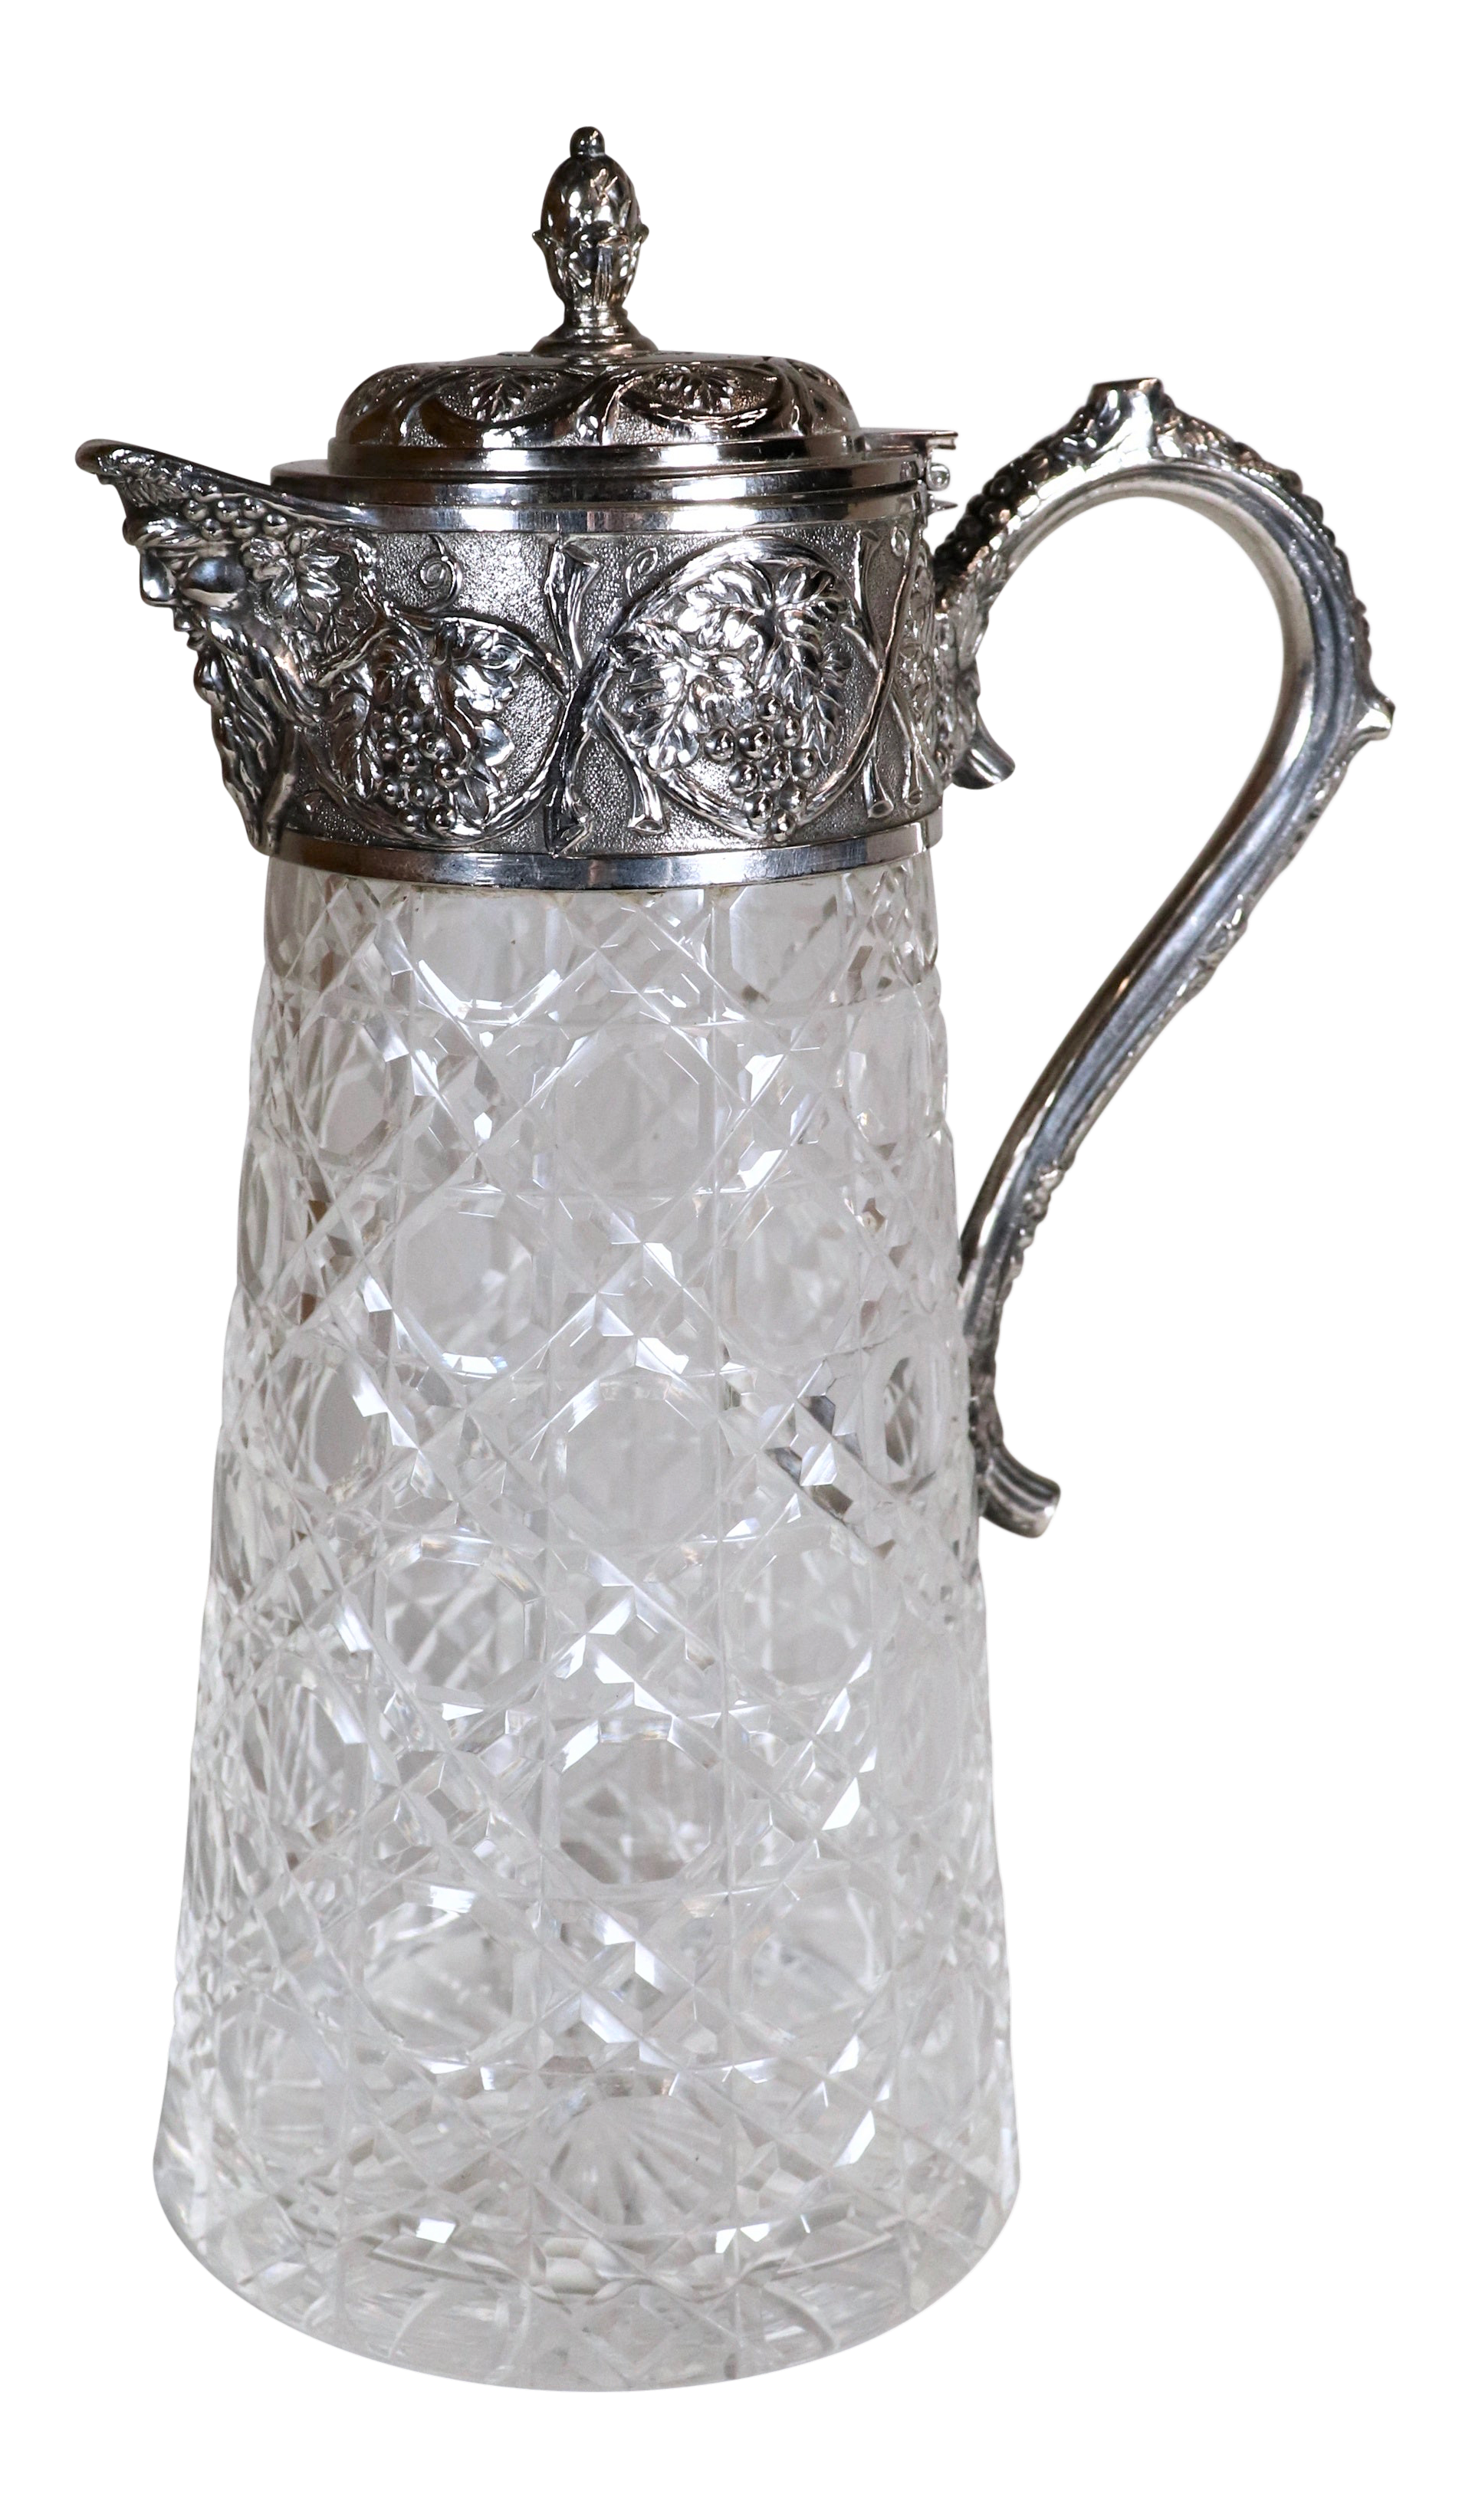 Carafe Pitcher Details about    Antique Silver-Plate & Lead Crystal Tall Serving Decanter 